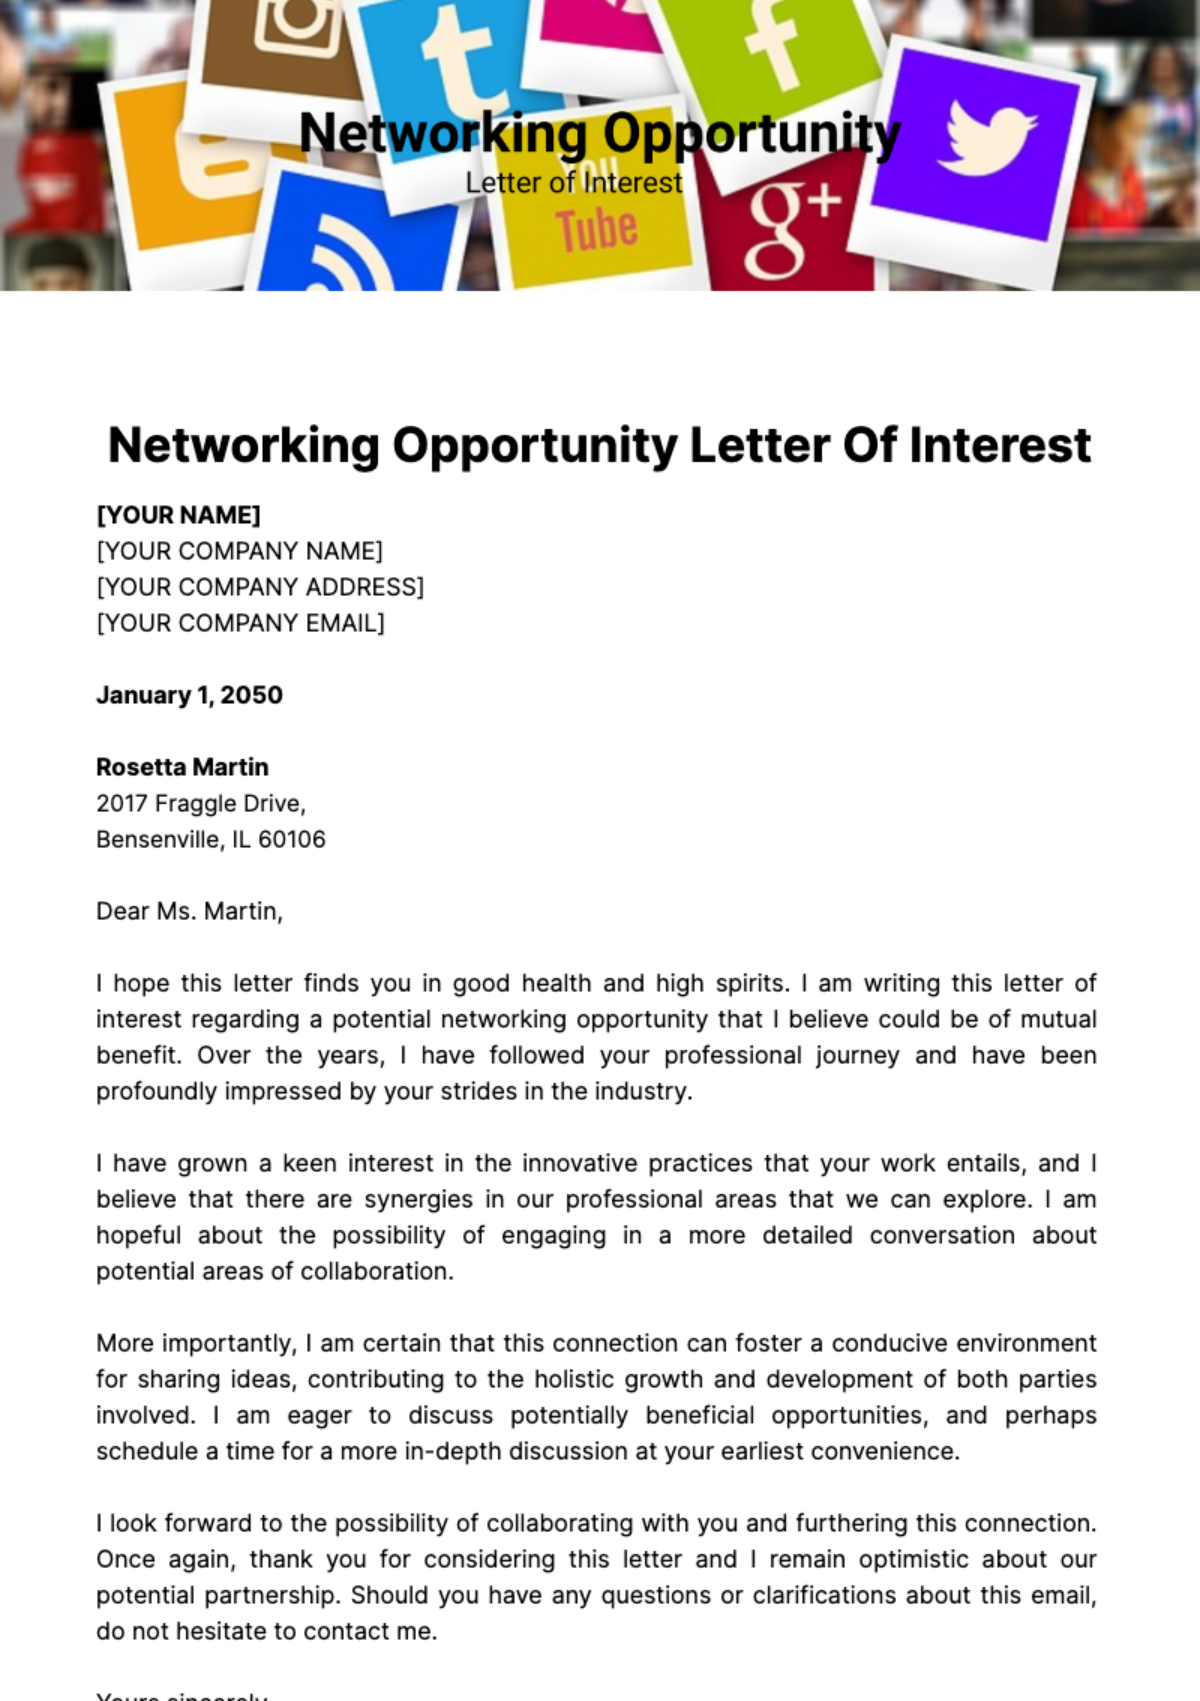 Networking Opportunity Letter of Interest Template